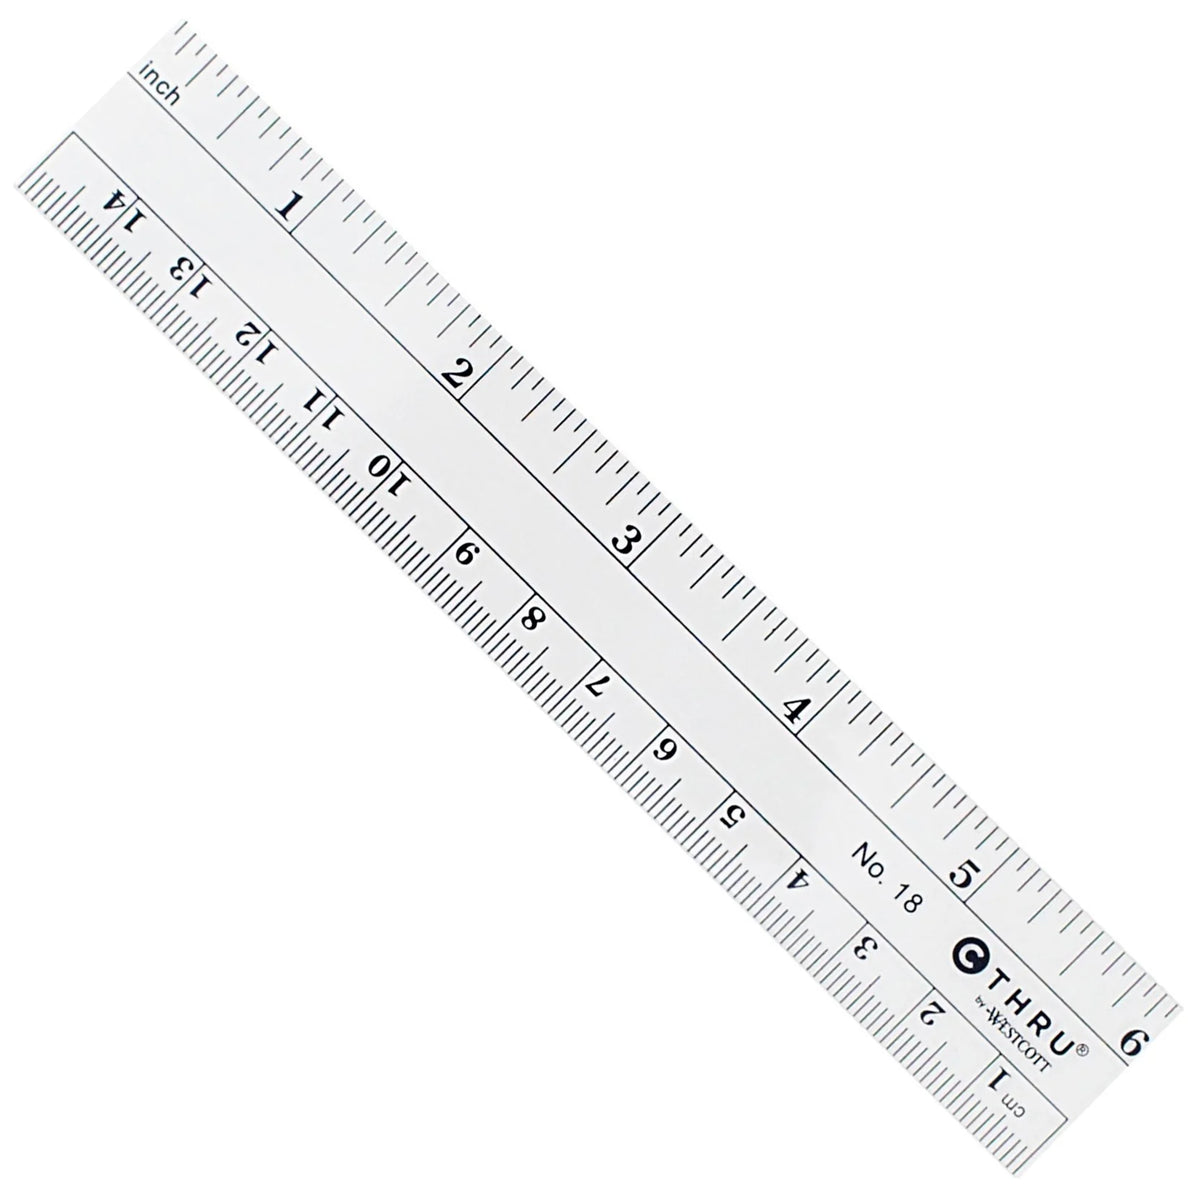 12-Inch Clear Plastic Ruler - Perfect for Scientific Measurements